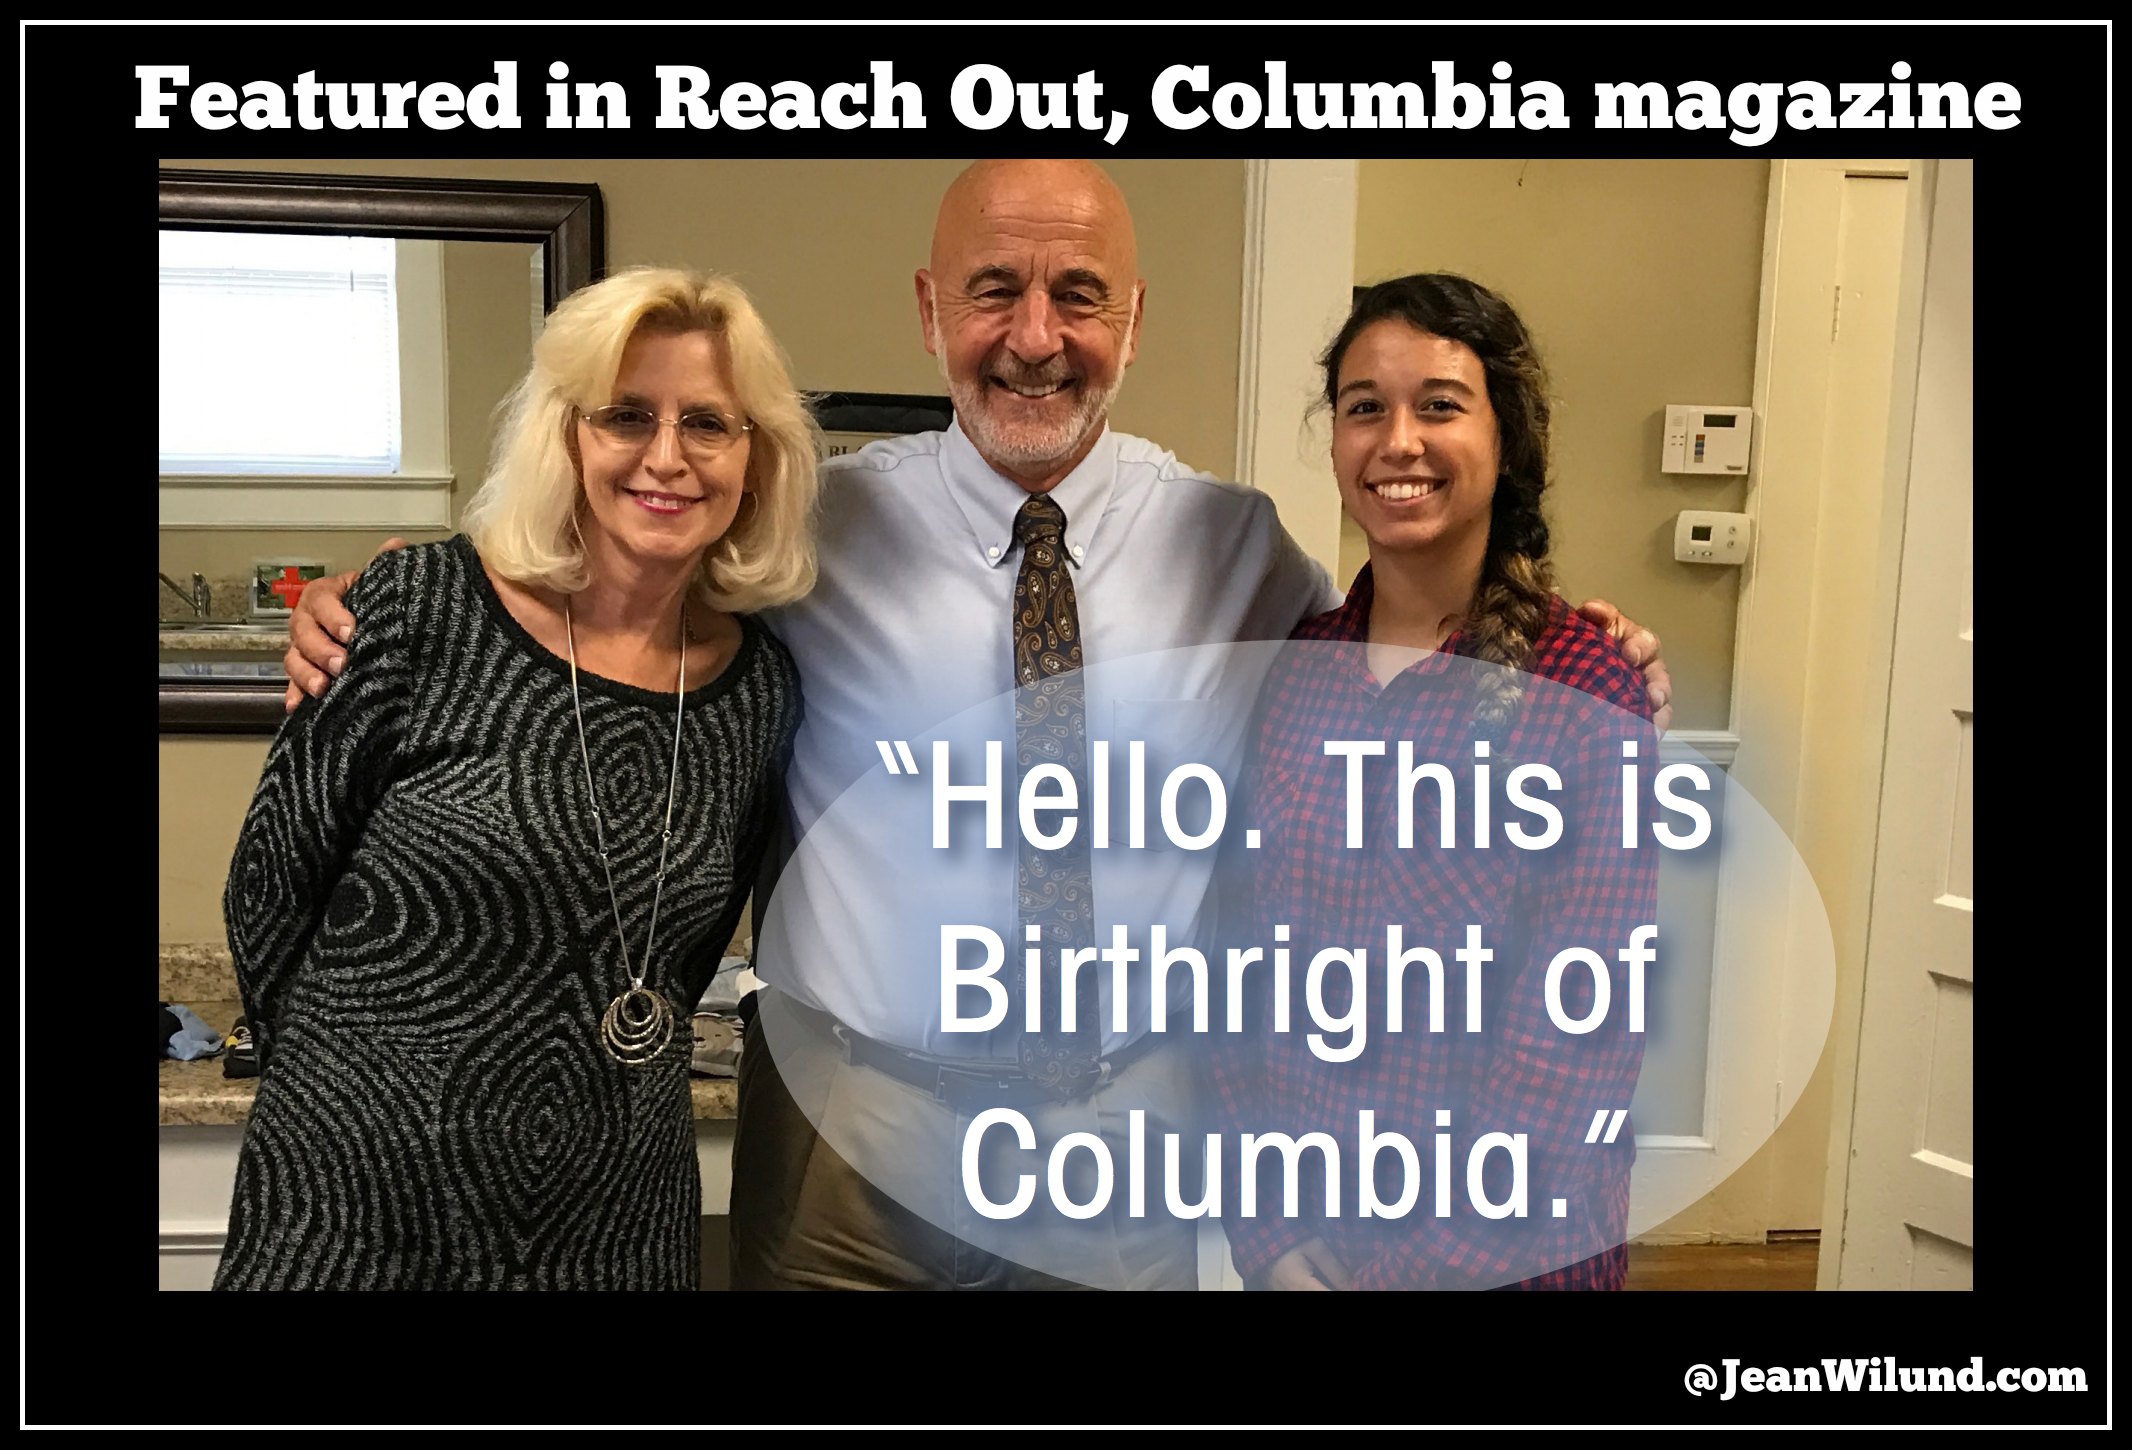 Every child has the right to live, and every mom has the right to give birth. That's why Birthright of Columbia does what it does. Read their powerful story here. via www.JeanWilund.com